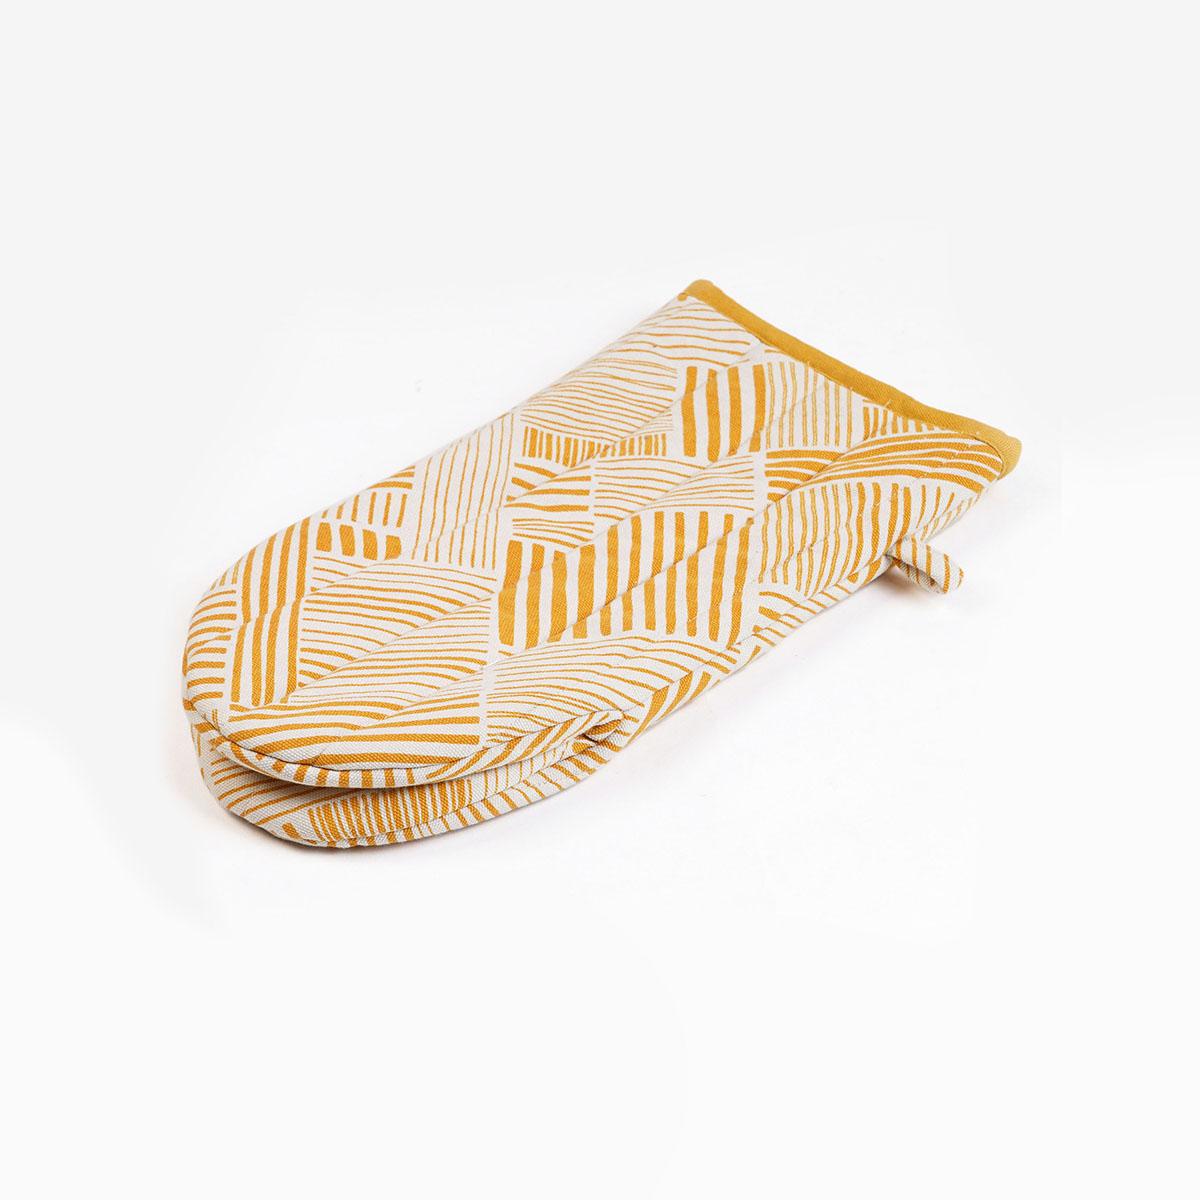 MODERN RETRO Pair of quilted Potholder and oven mitt in Mustard Yellow colour stripe print in 100% cotton